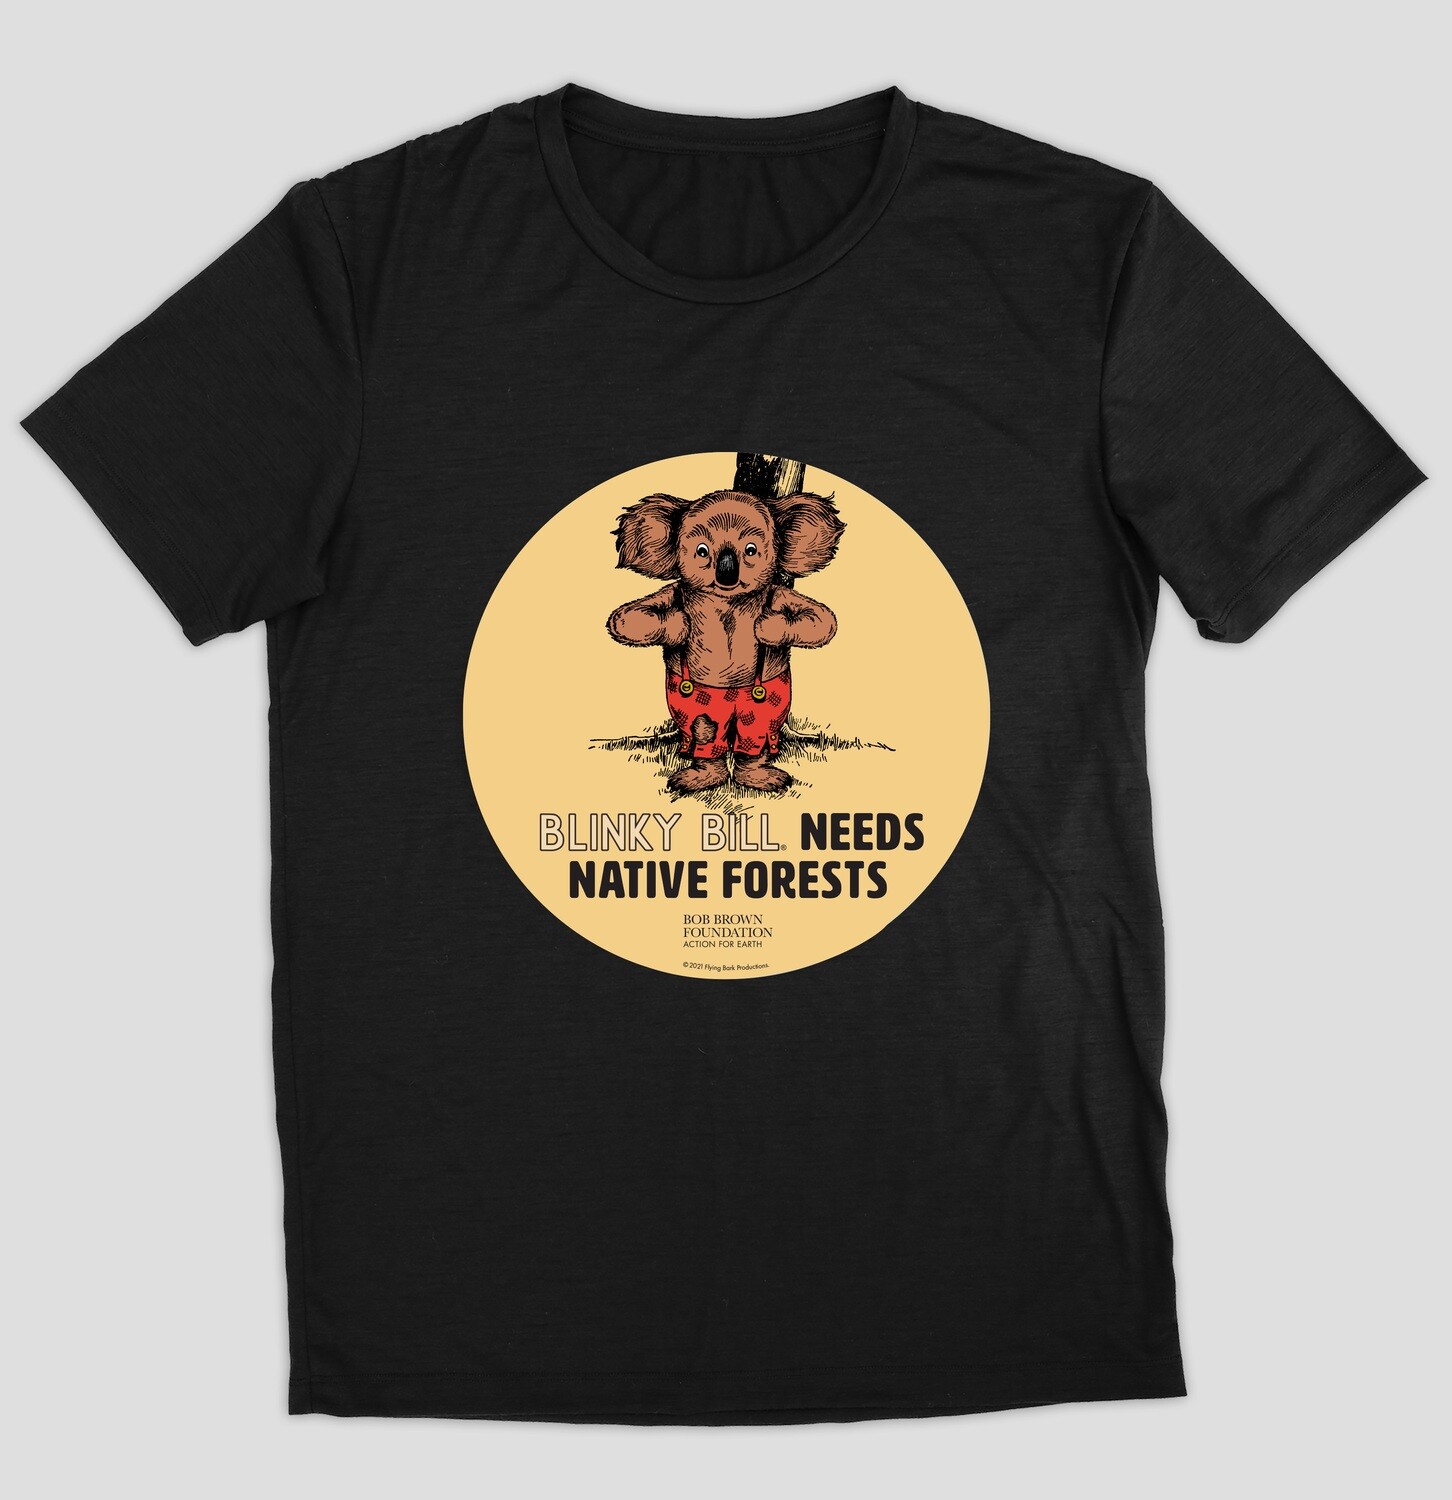 Blinky Bill Needs Native Forests tee